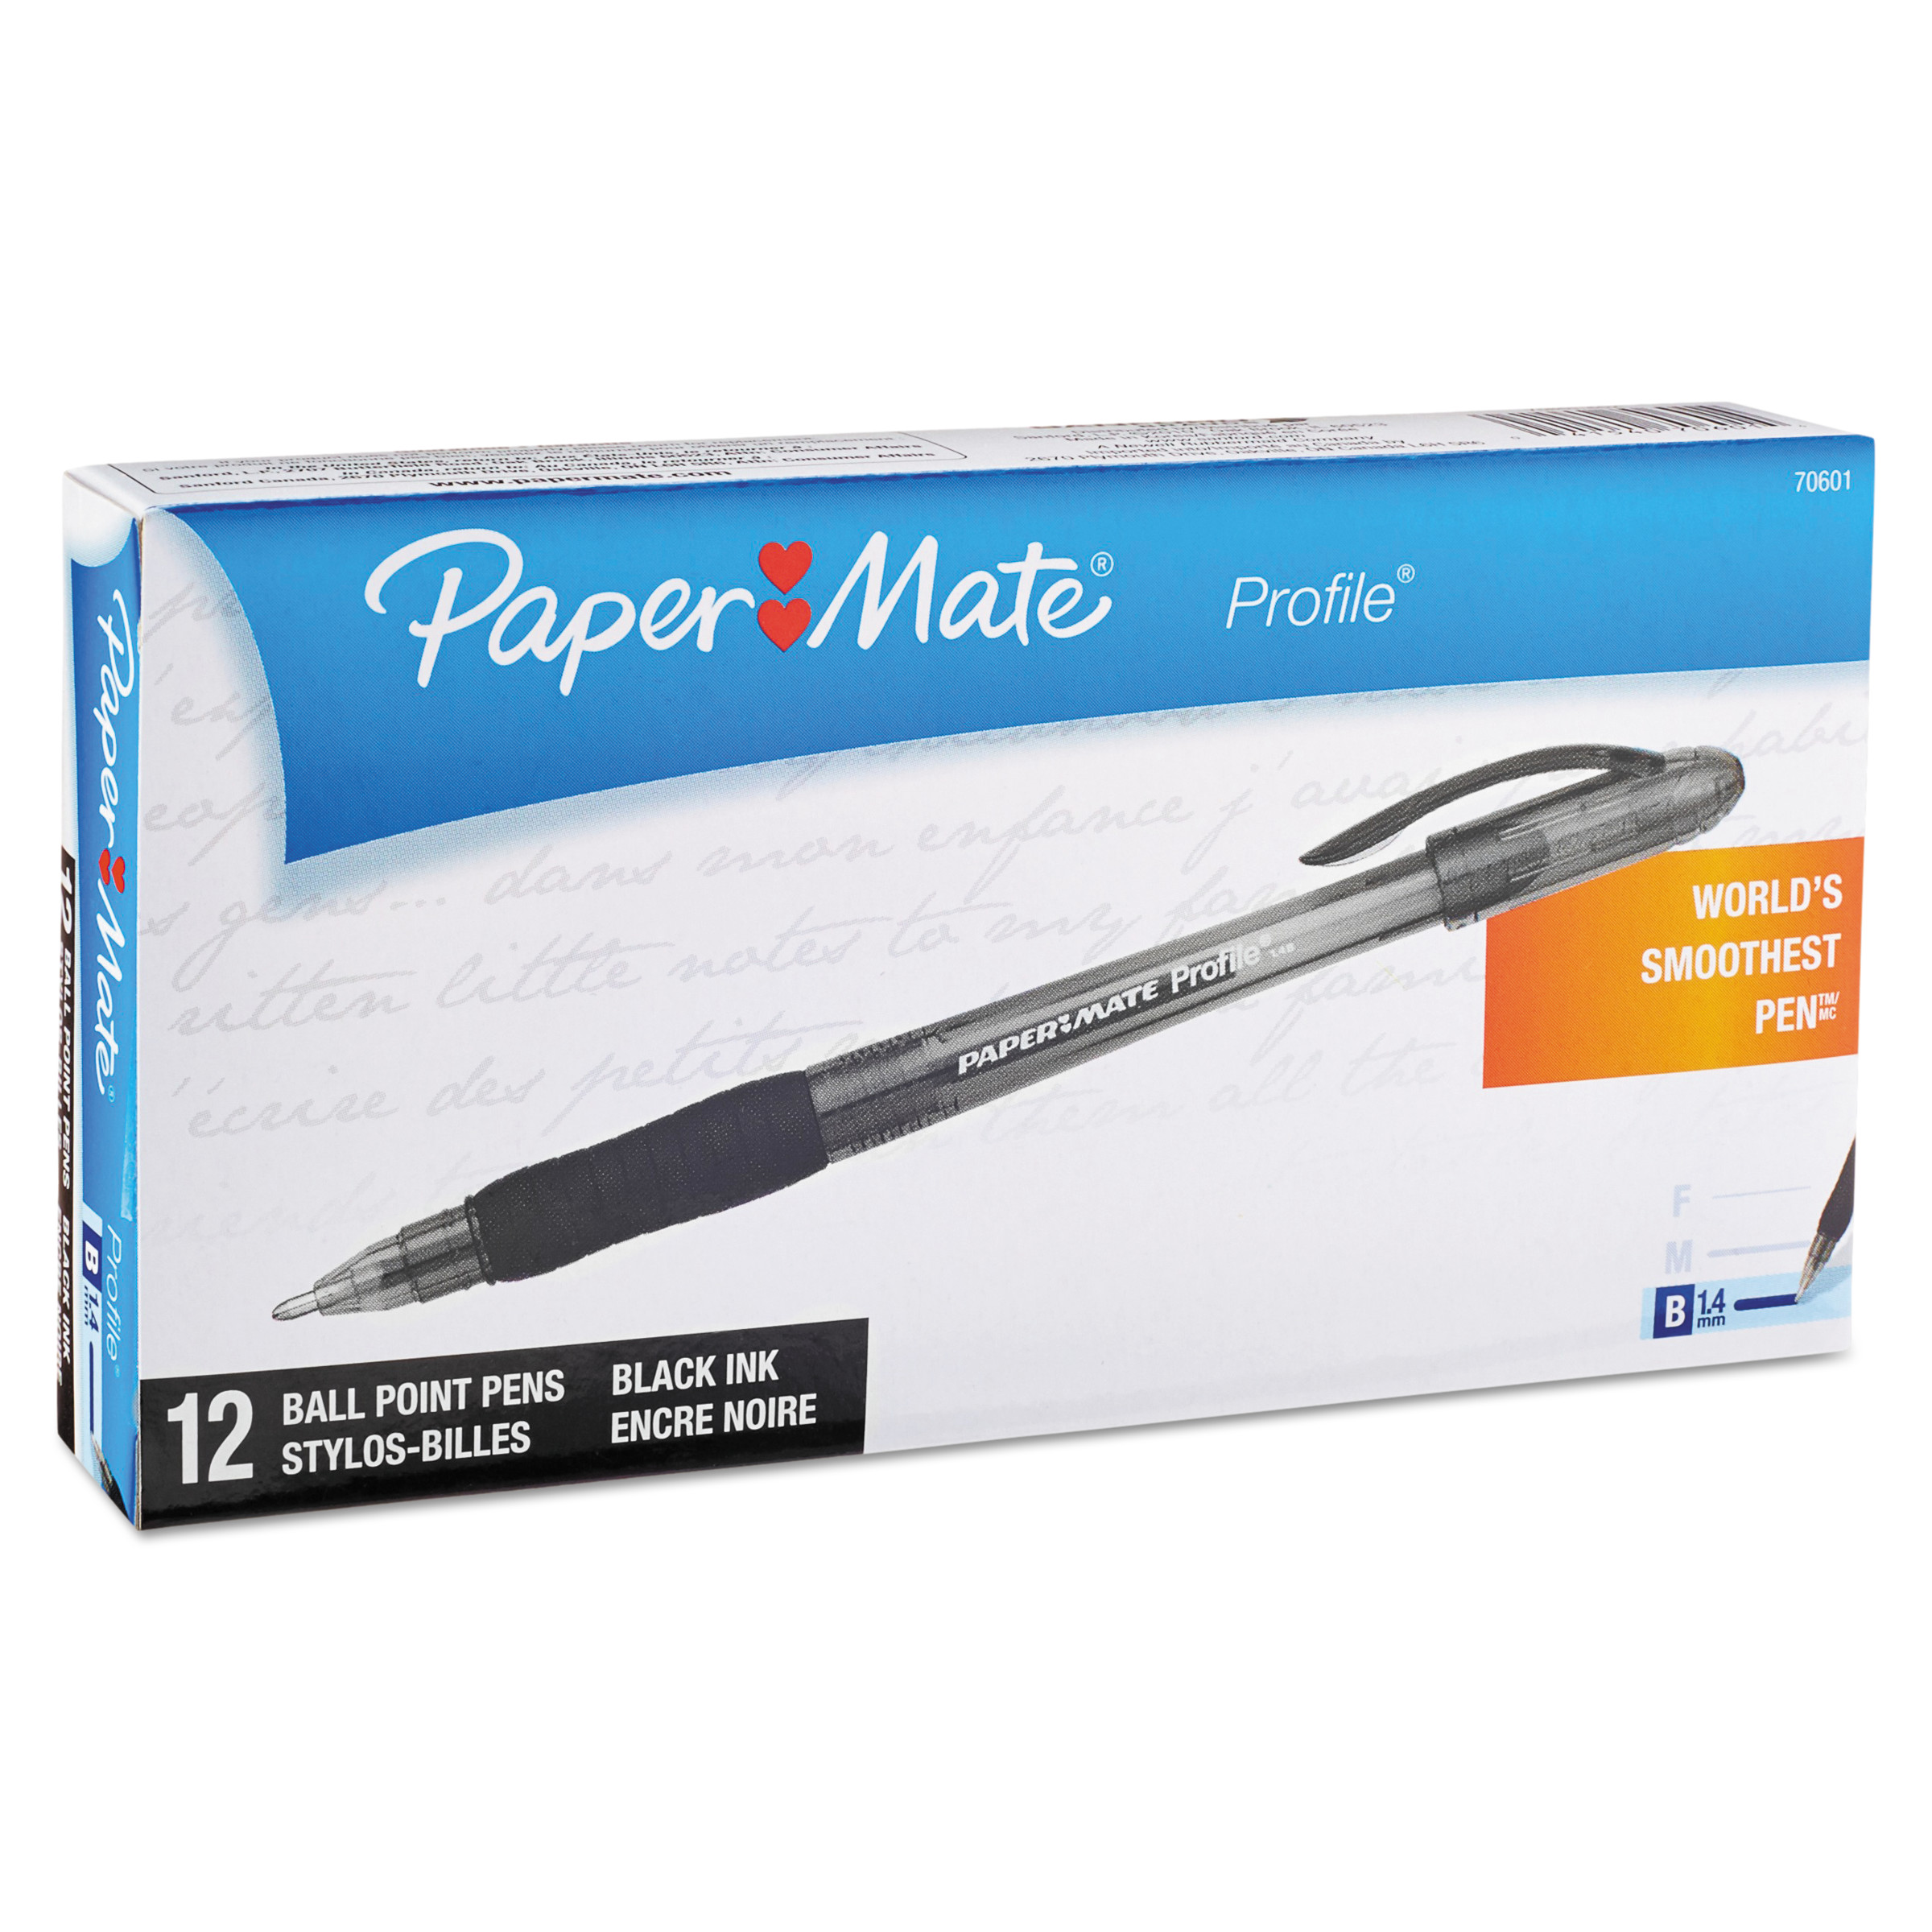 Paper Mate Profile Ballpoint Pen, 1.4 mm Bold Tip, Black, Pack of 12 - image 3 of 5